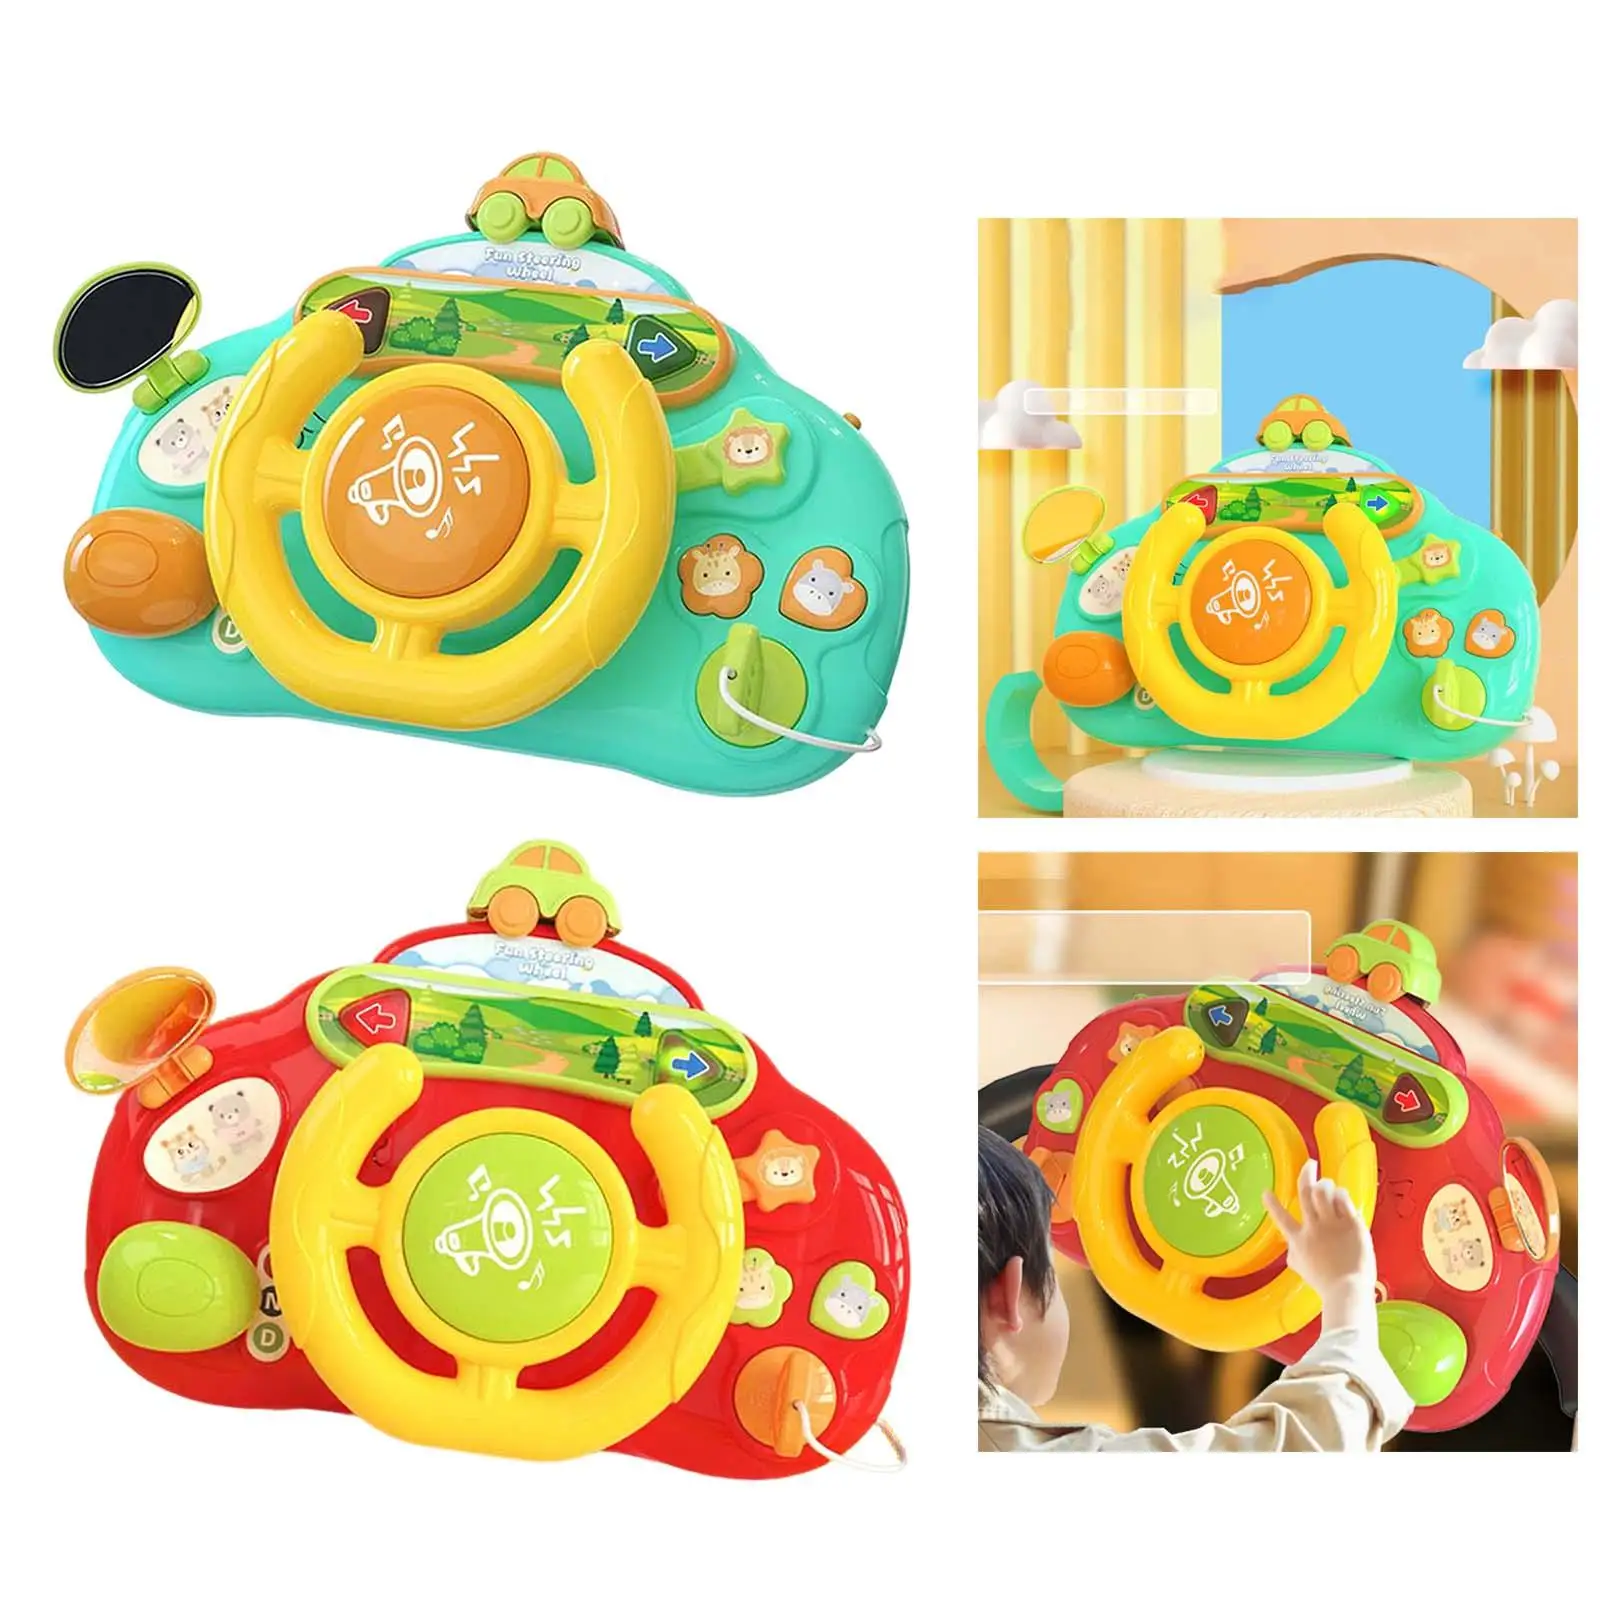 Musical Steering Wheel Toy Simulated Driving Controller for Party Interaction Role Play